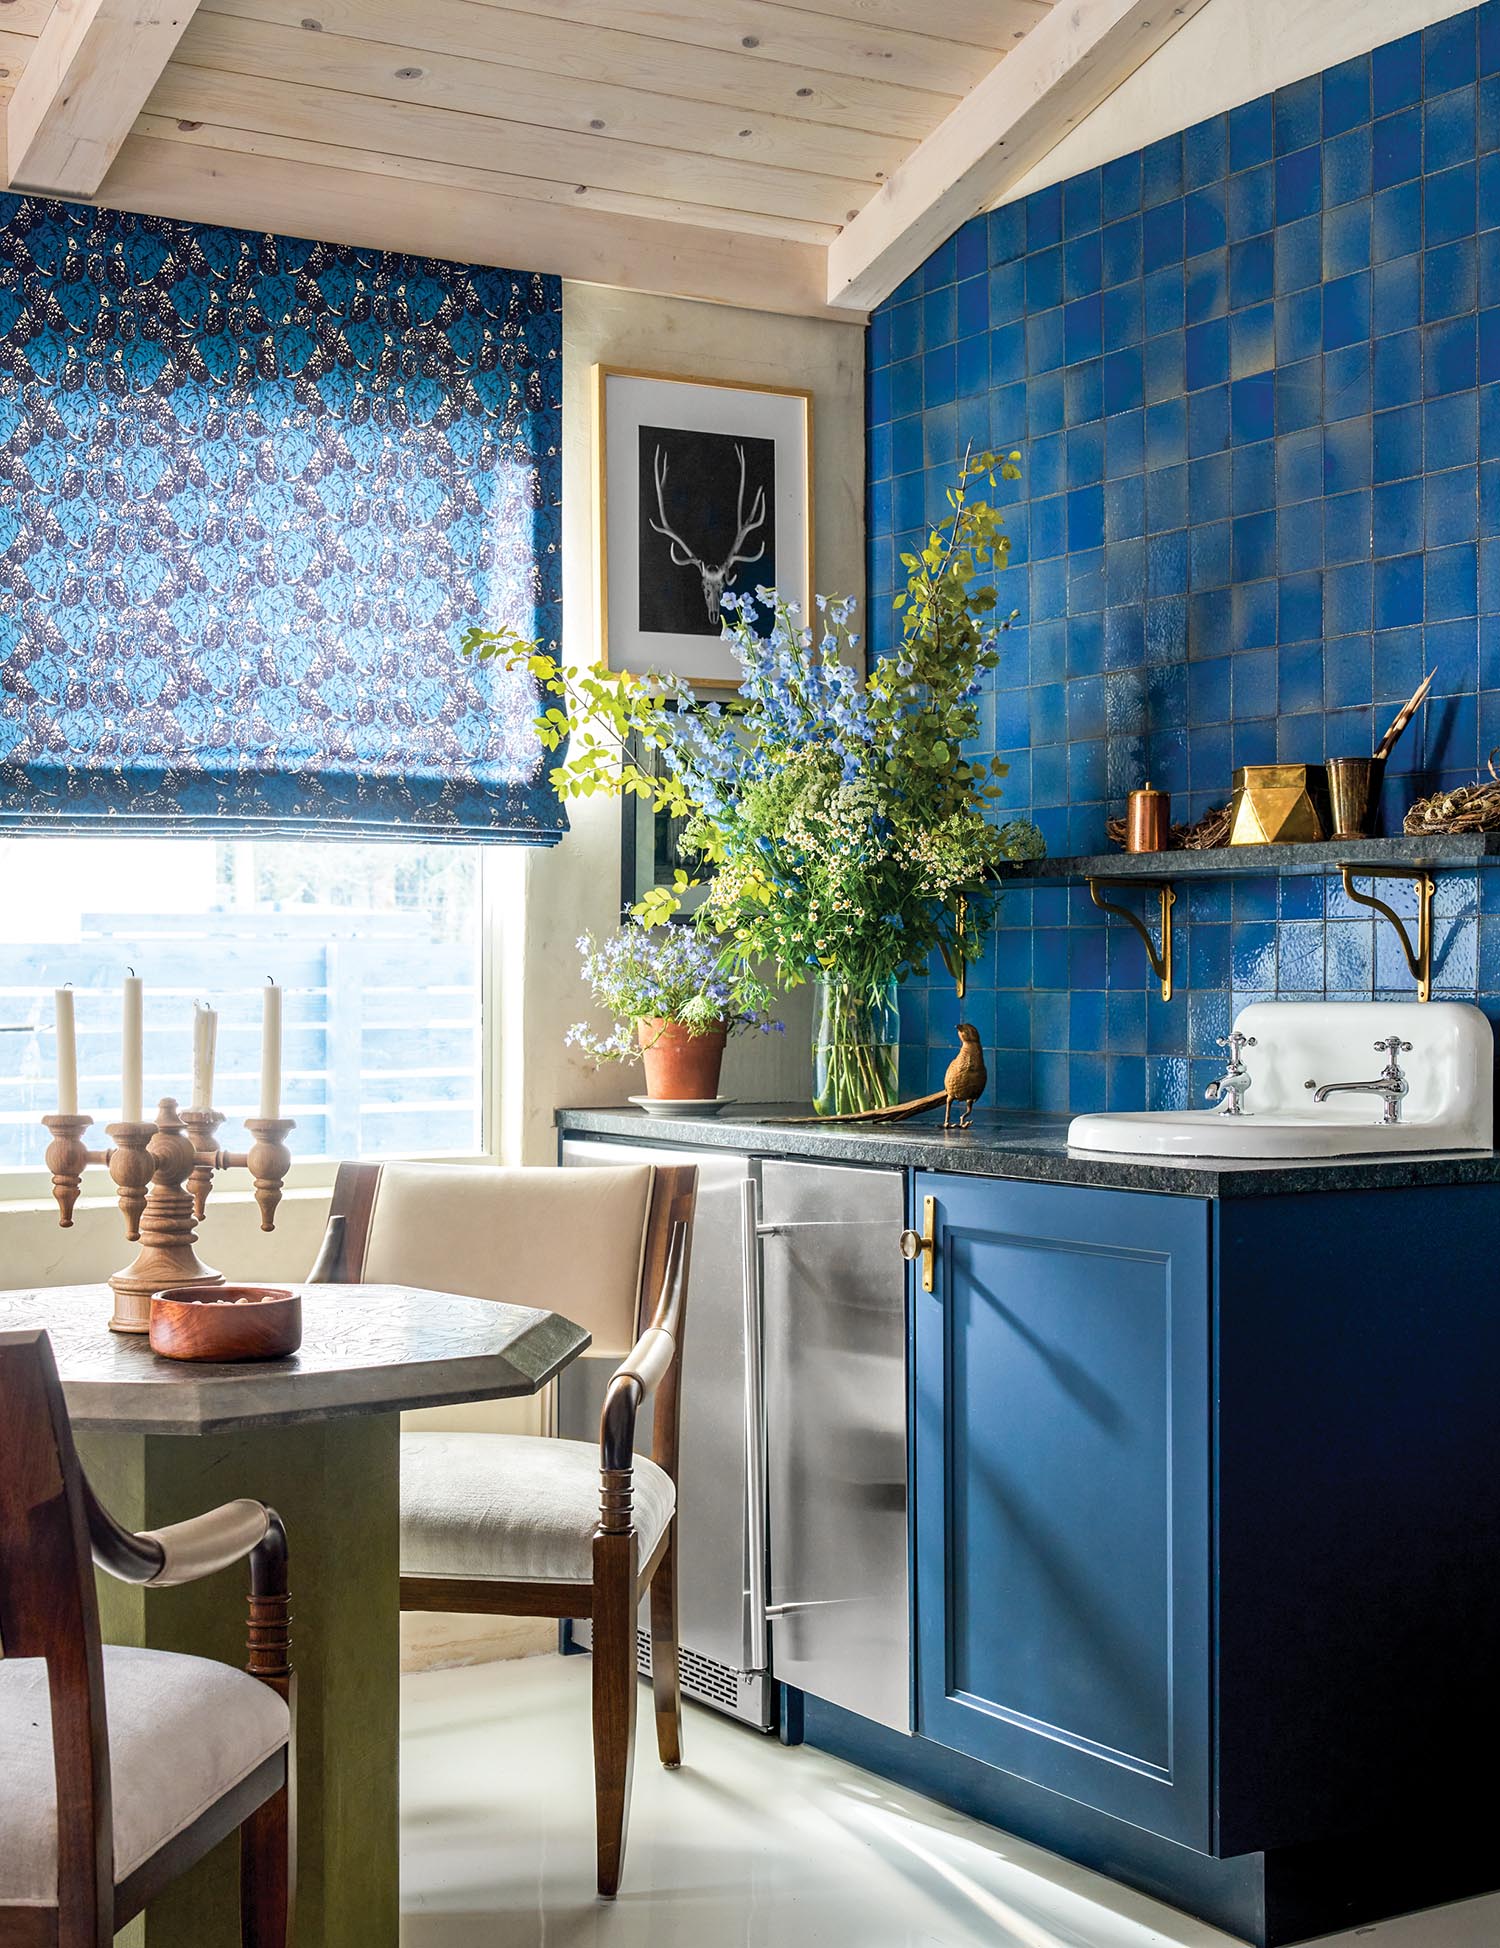 A guest-house wet bar area has blue tile and cabinetry.